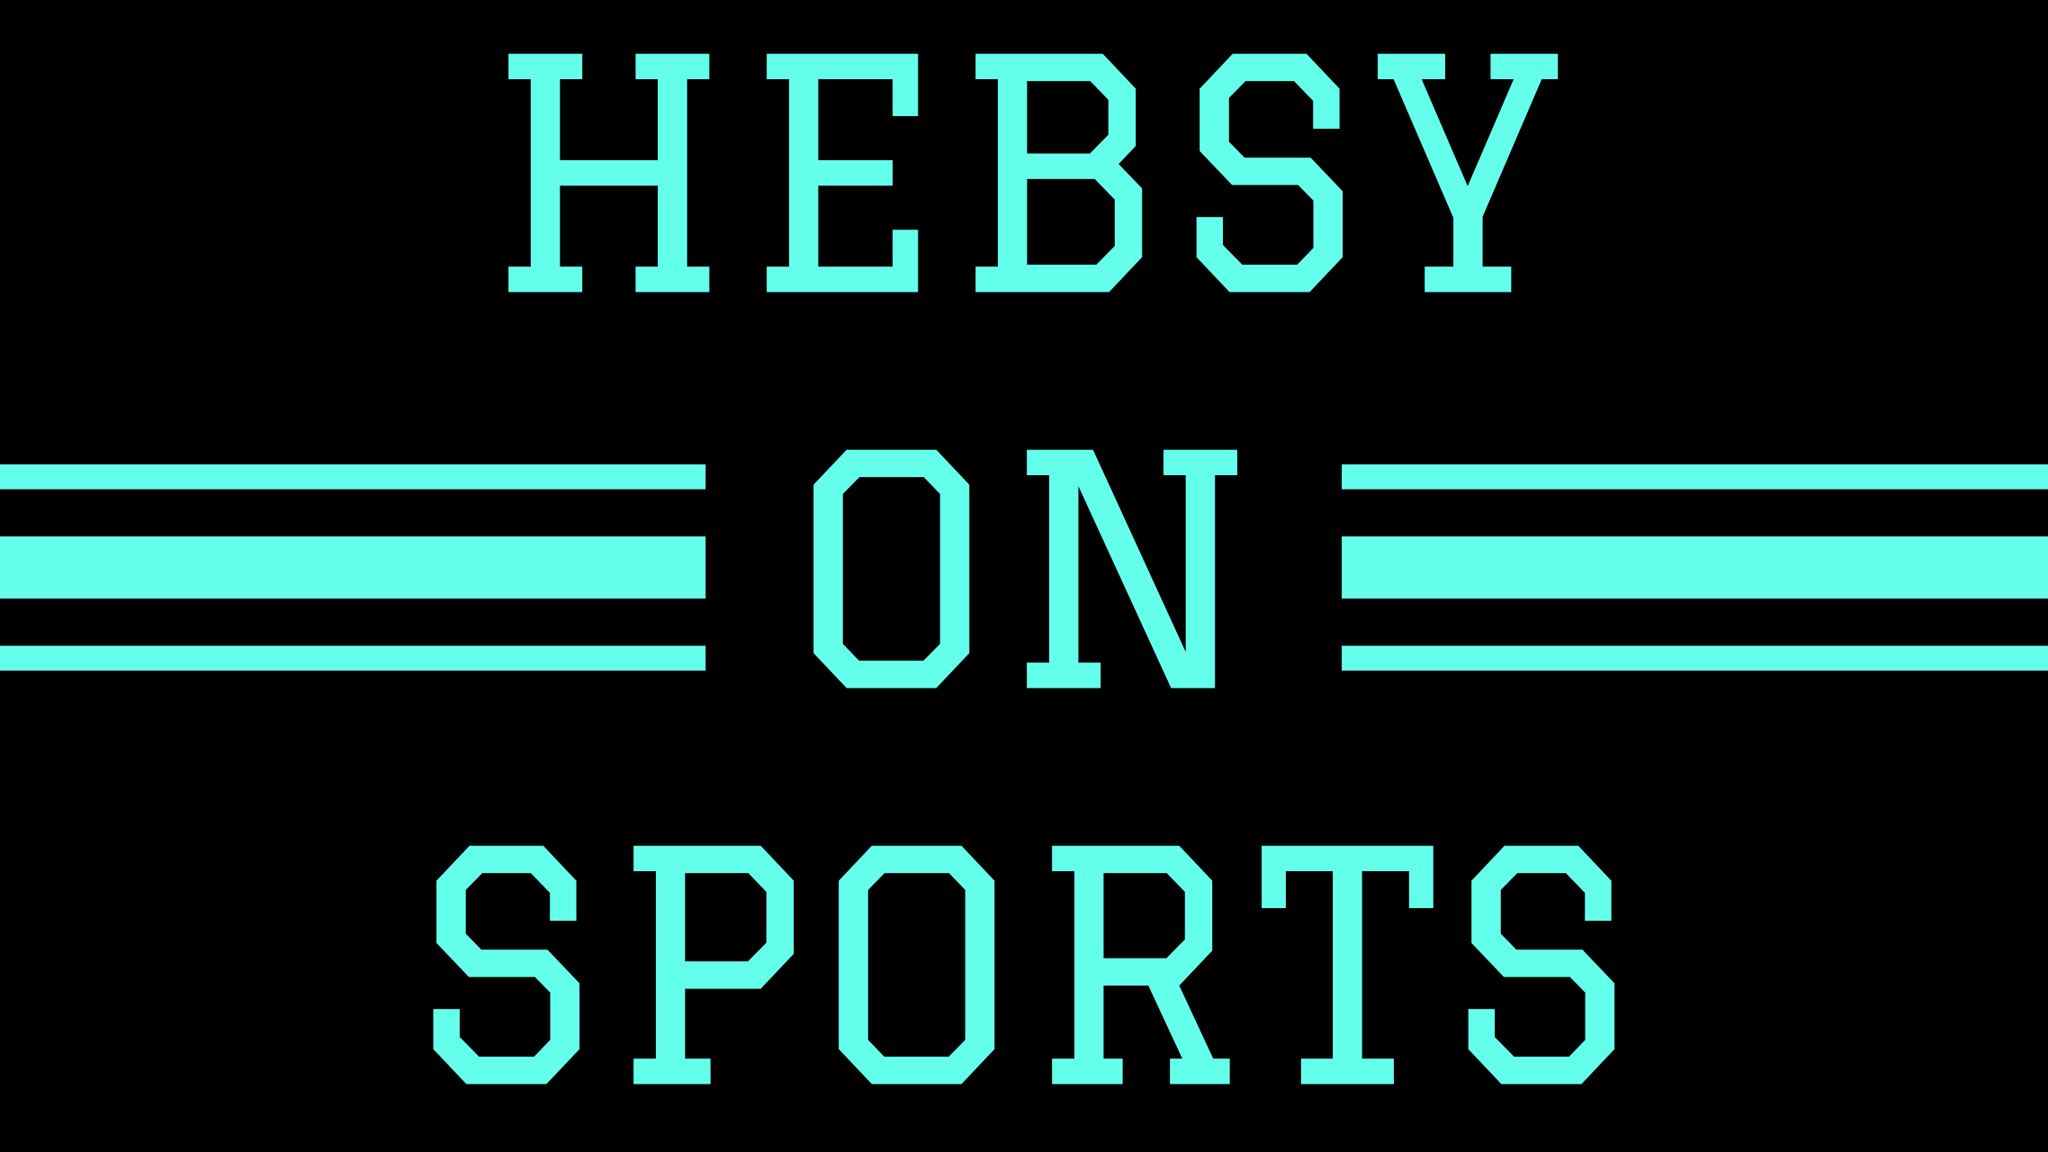 Hebsy on Sports for November 19, 2021